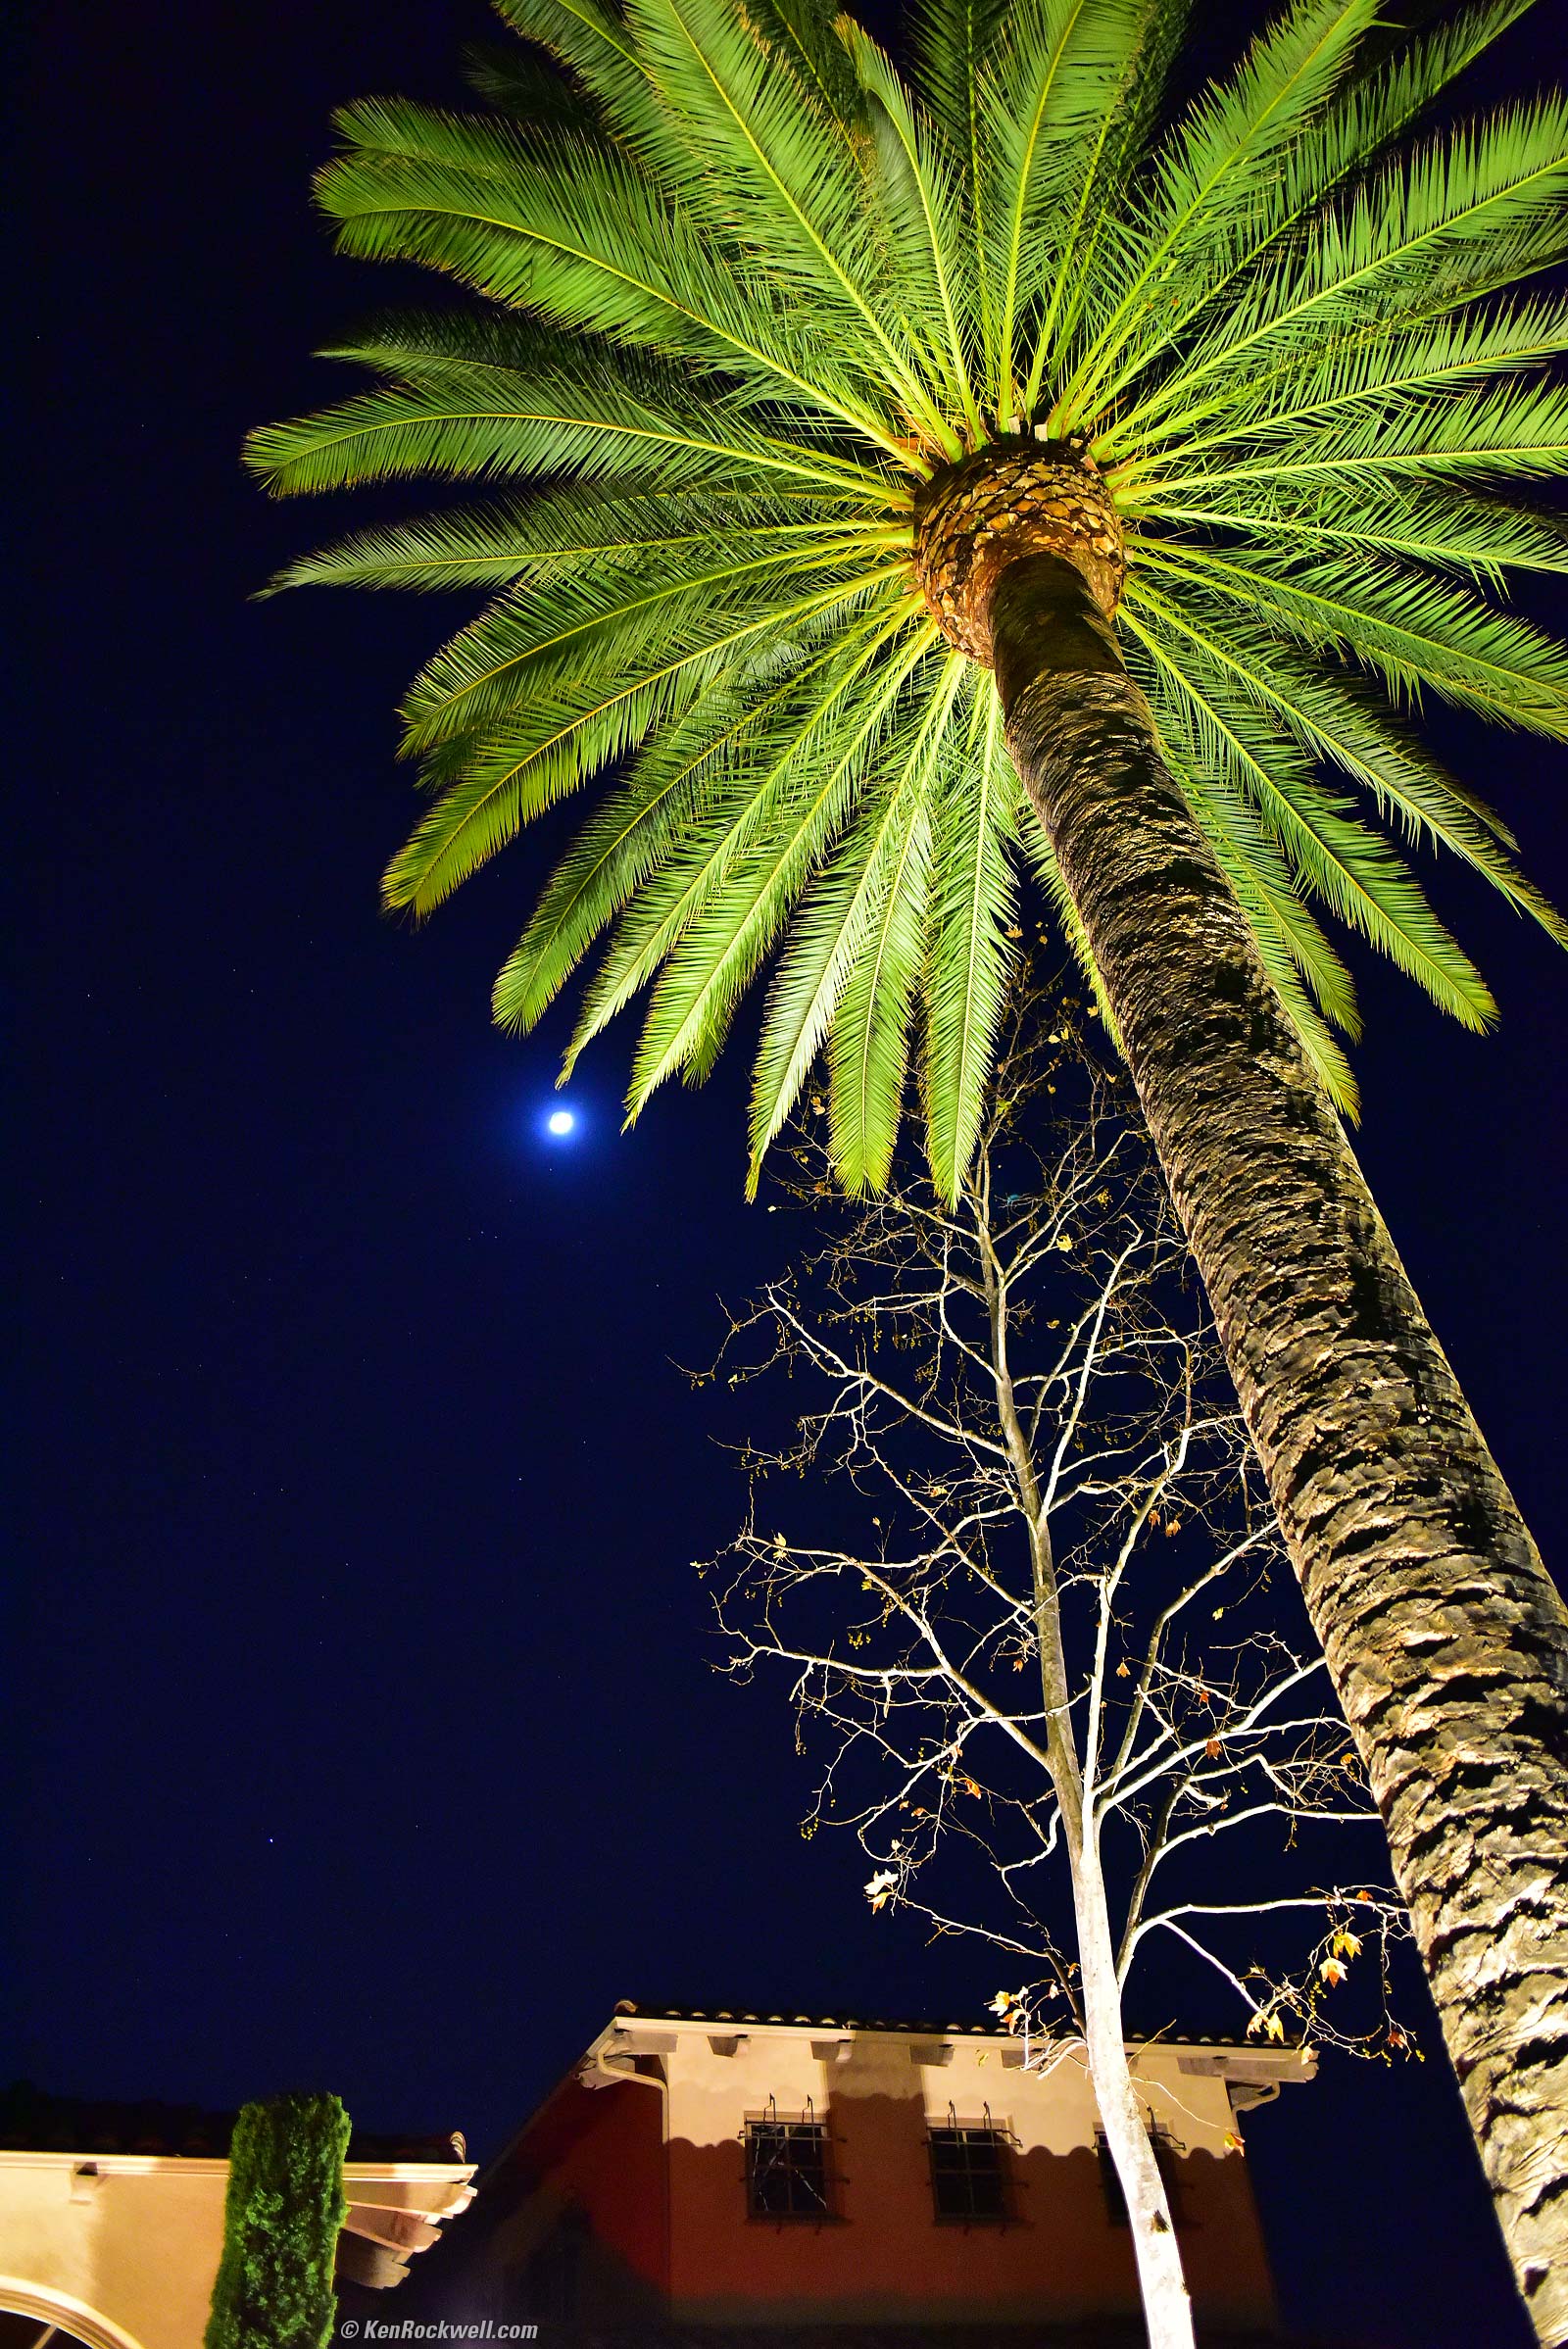 Palm at night with moon